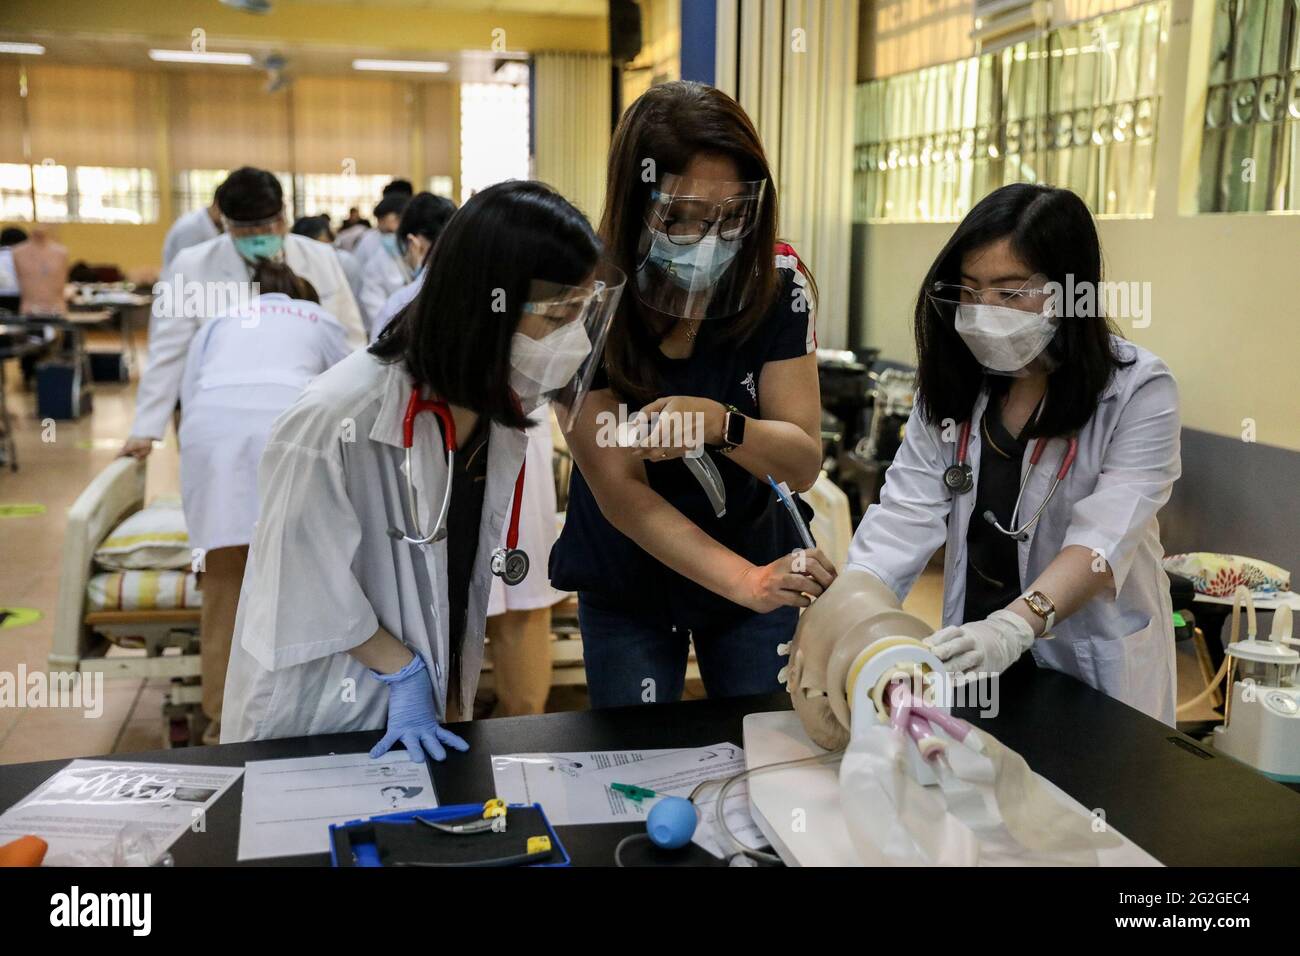 Manila, Philippines. June 10th 2021. Medical students perform an endotracheal intubation on a dummy during a face-to-face class at the University of Santo Tomas. The university started its limited face-to-face classes after the government allowed the resumption hands-on training and laboratory classes in campuses while observing health protocols to prevent the spread of the coronavirus disease. Stock Photo